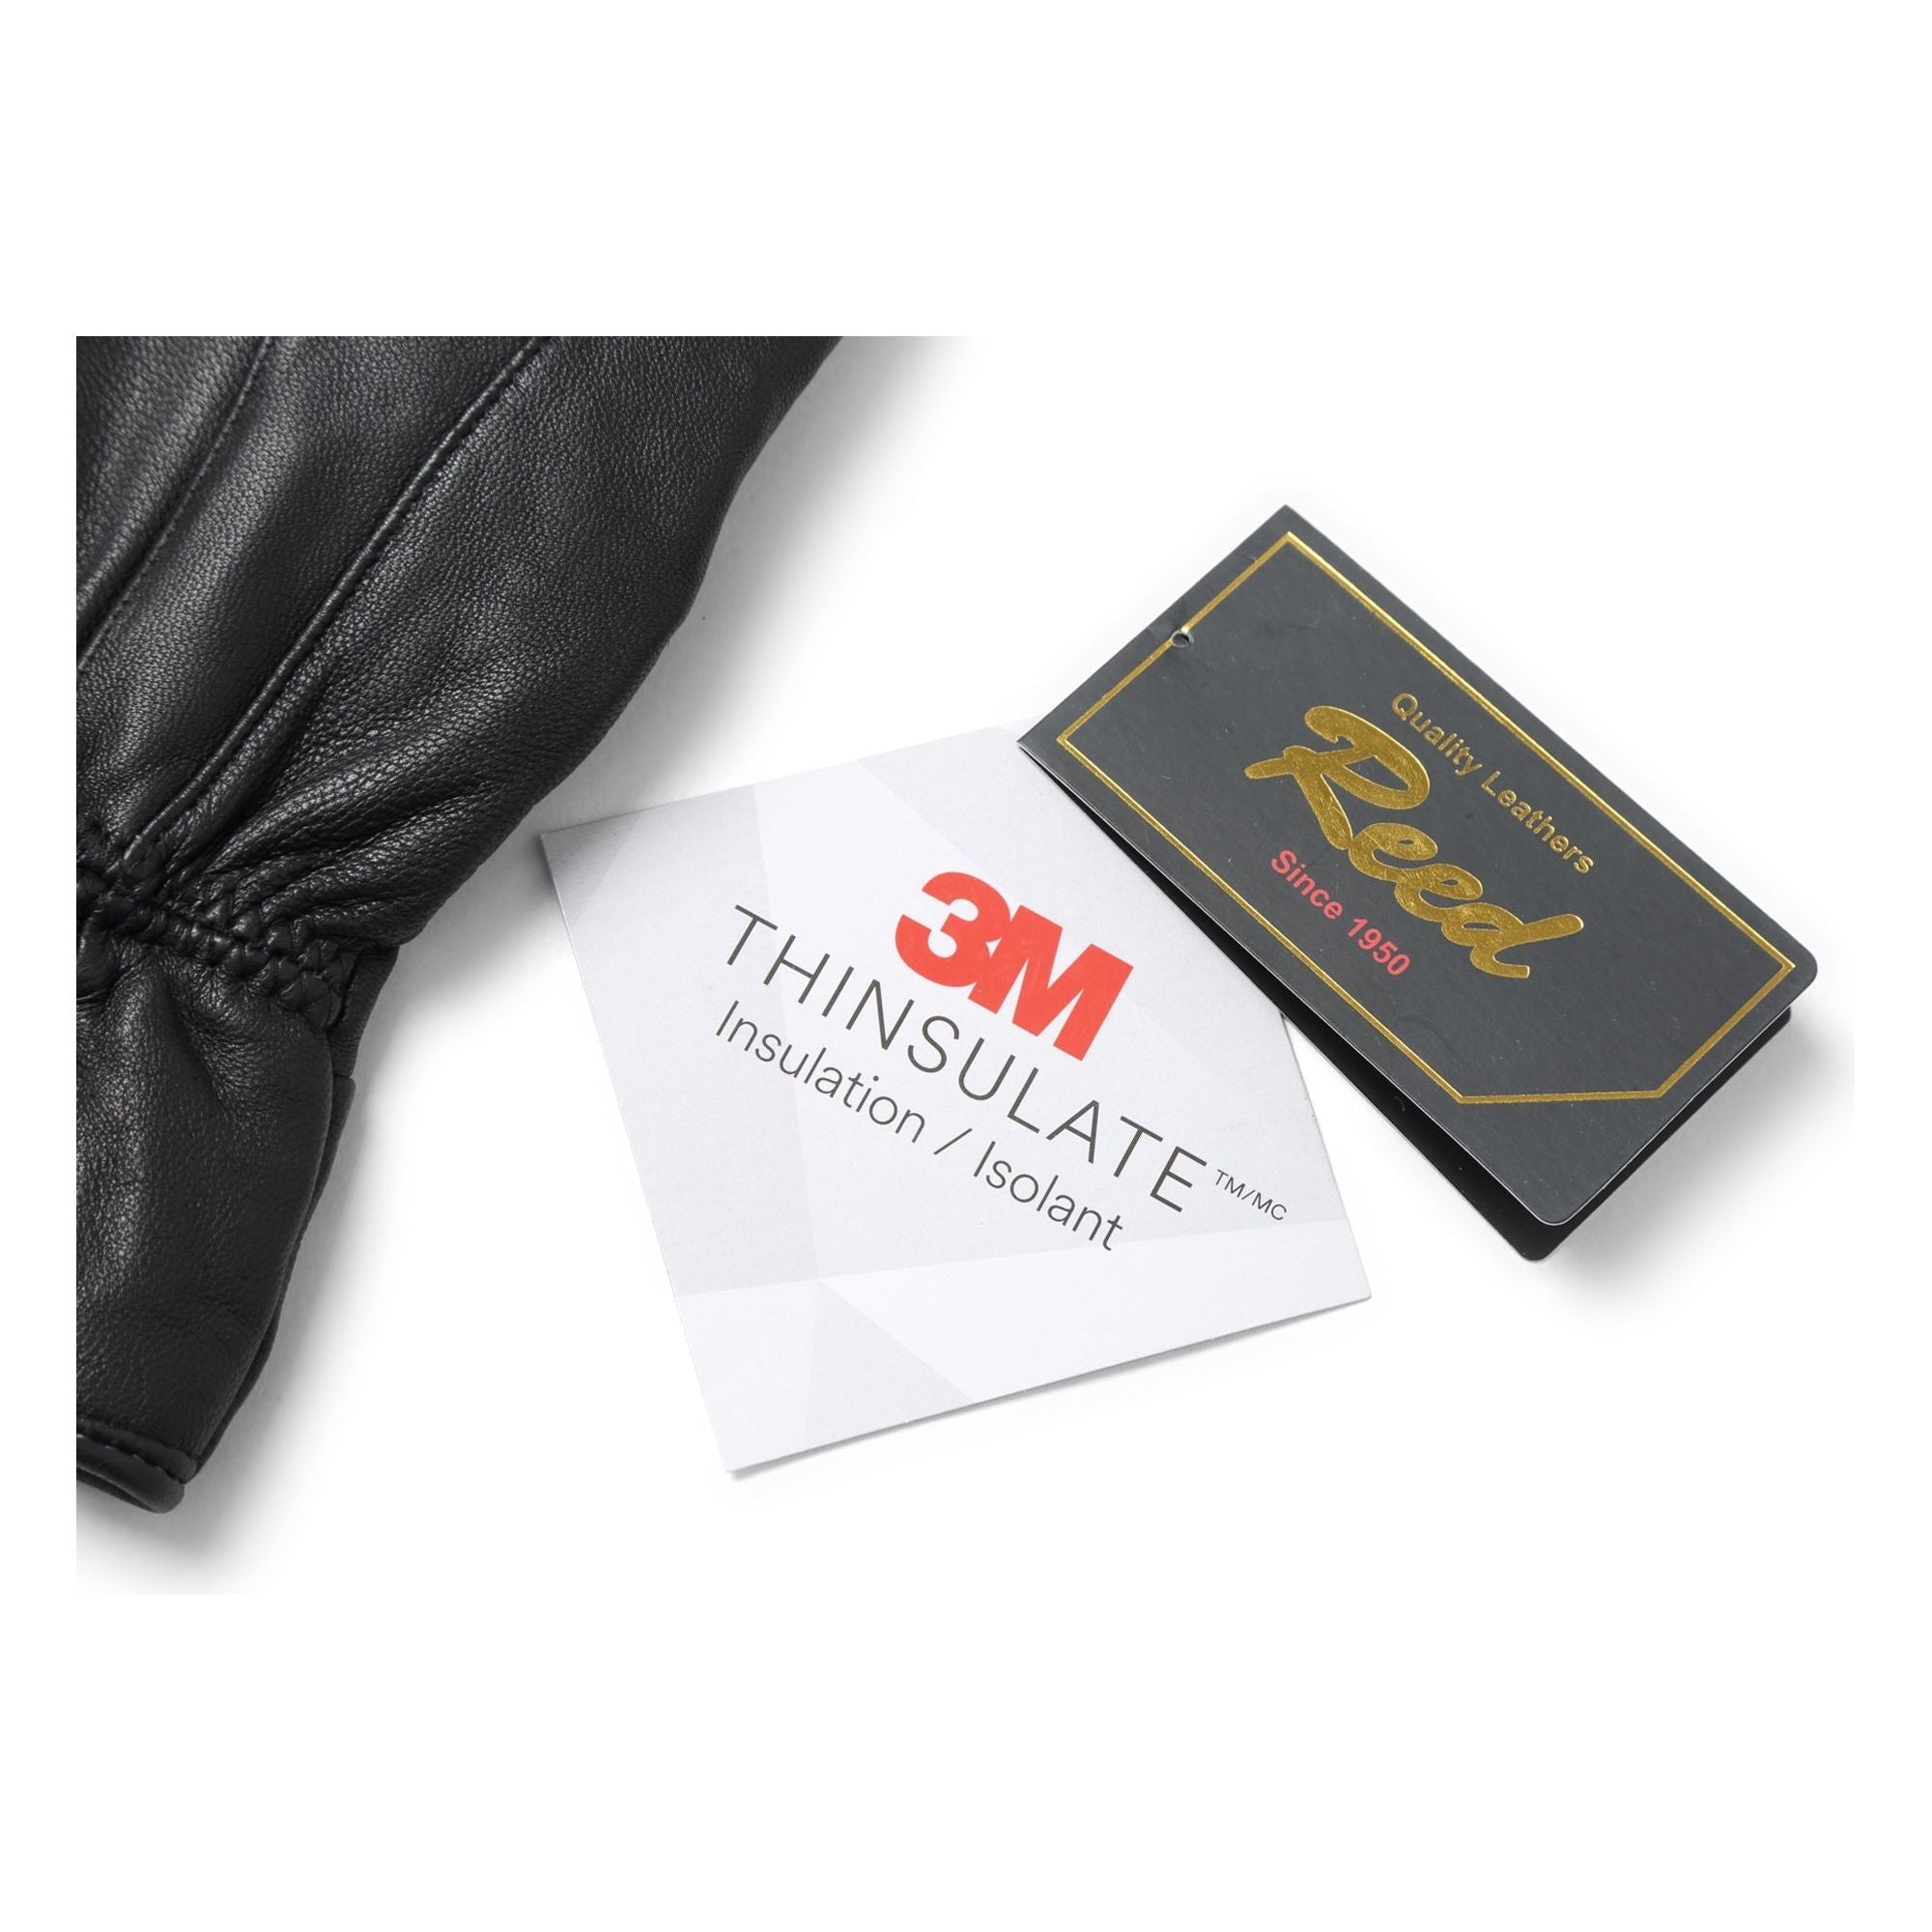 Reed Men's Genuine Leather Warm Lined Driving Gloves - Touchscreen Texting Compatible - Imported - KME means the very best